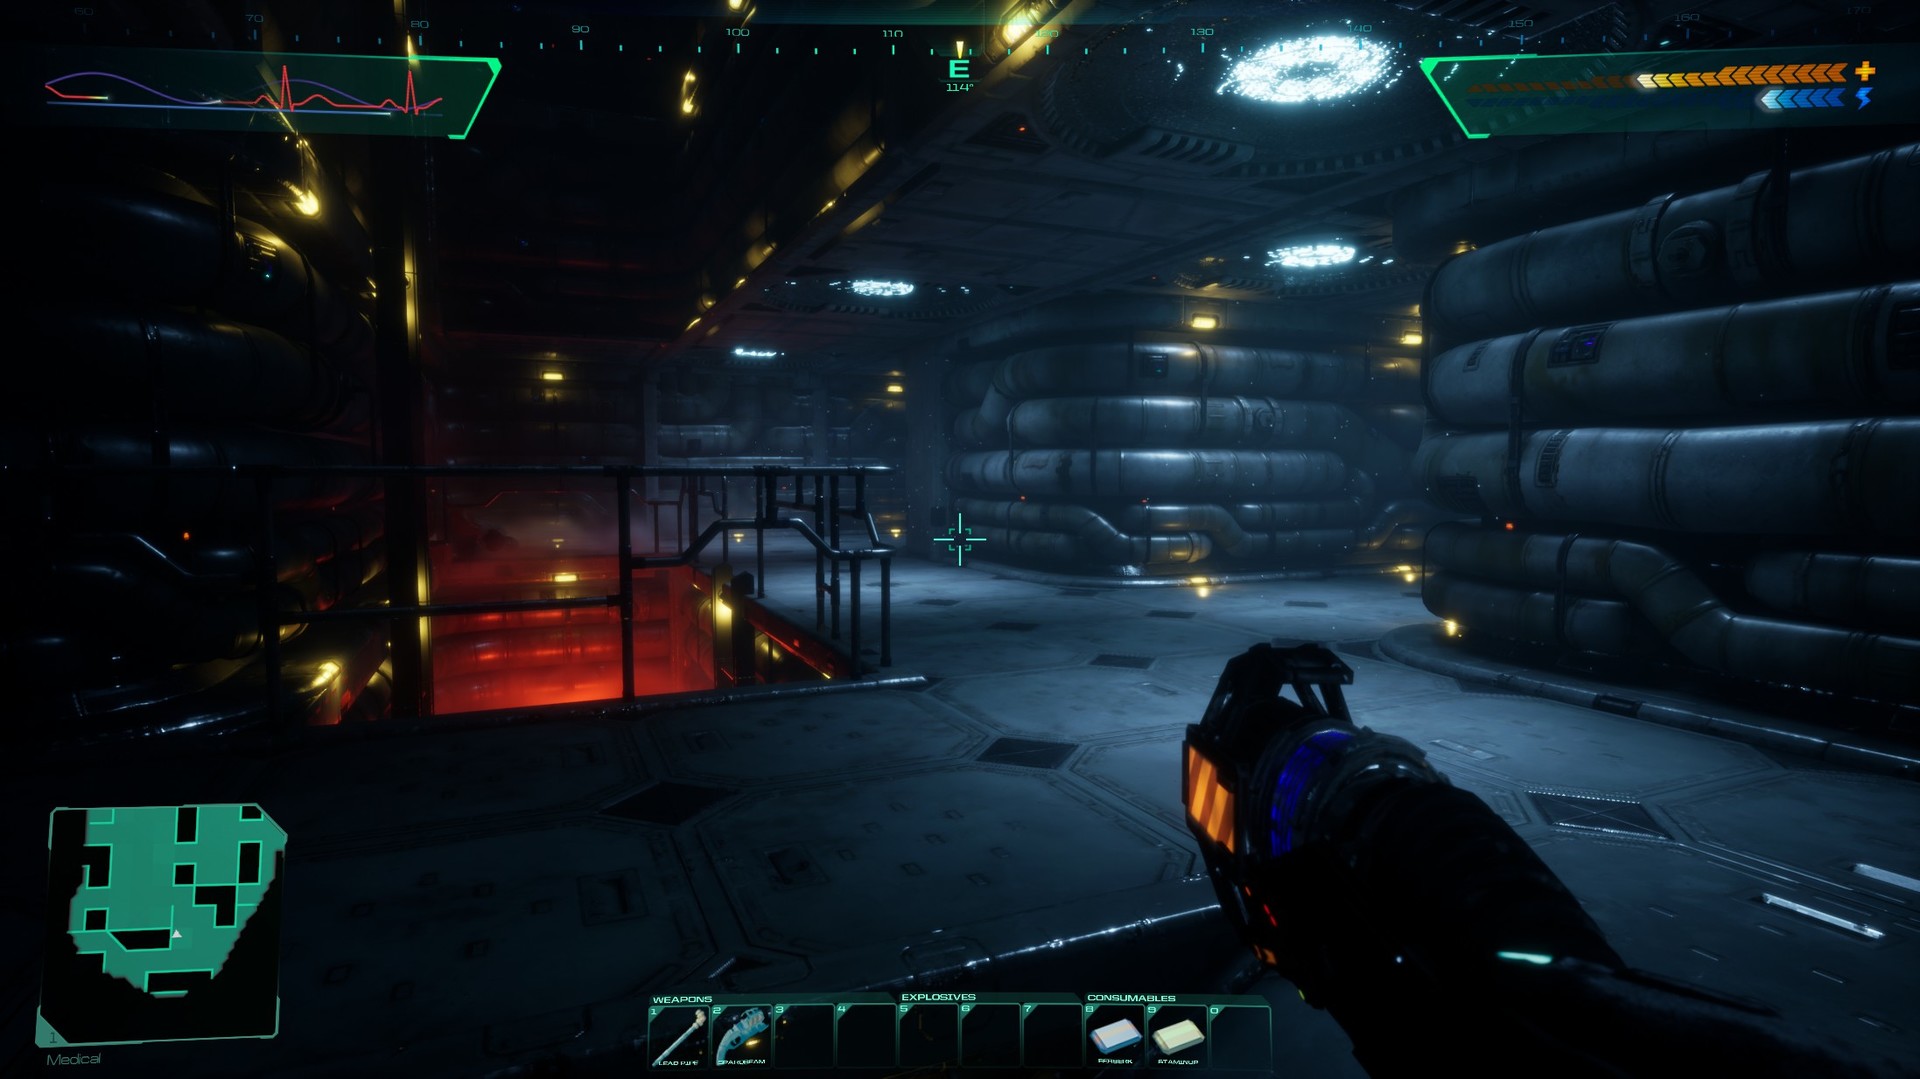 Media asset in full size related to 3dfxzone.it news item entitled as follows: Nightdive Studios pubblica una demo del gameplay di System Shock (2020) | Image Name: news30417_System-Shock-Screenshot_1.jpg